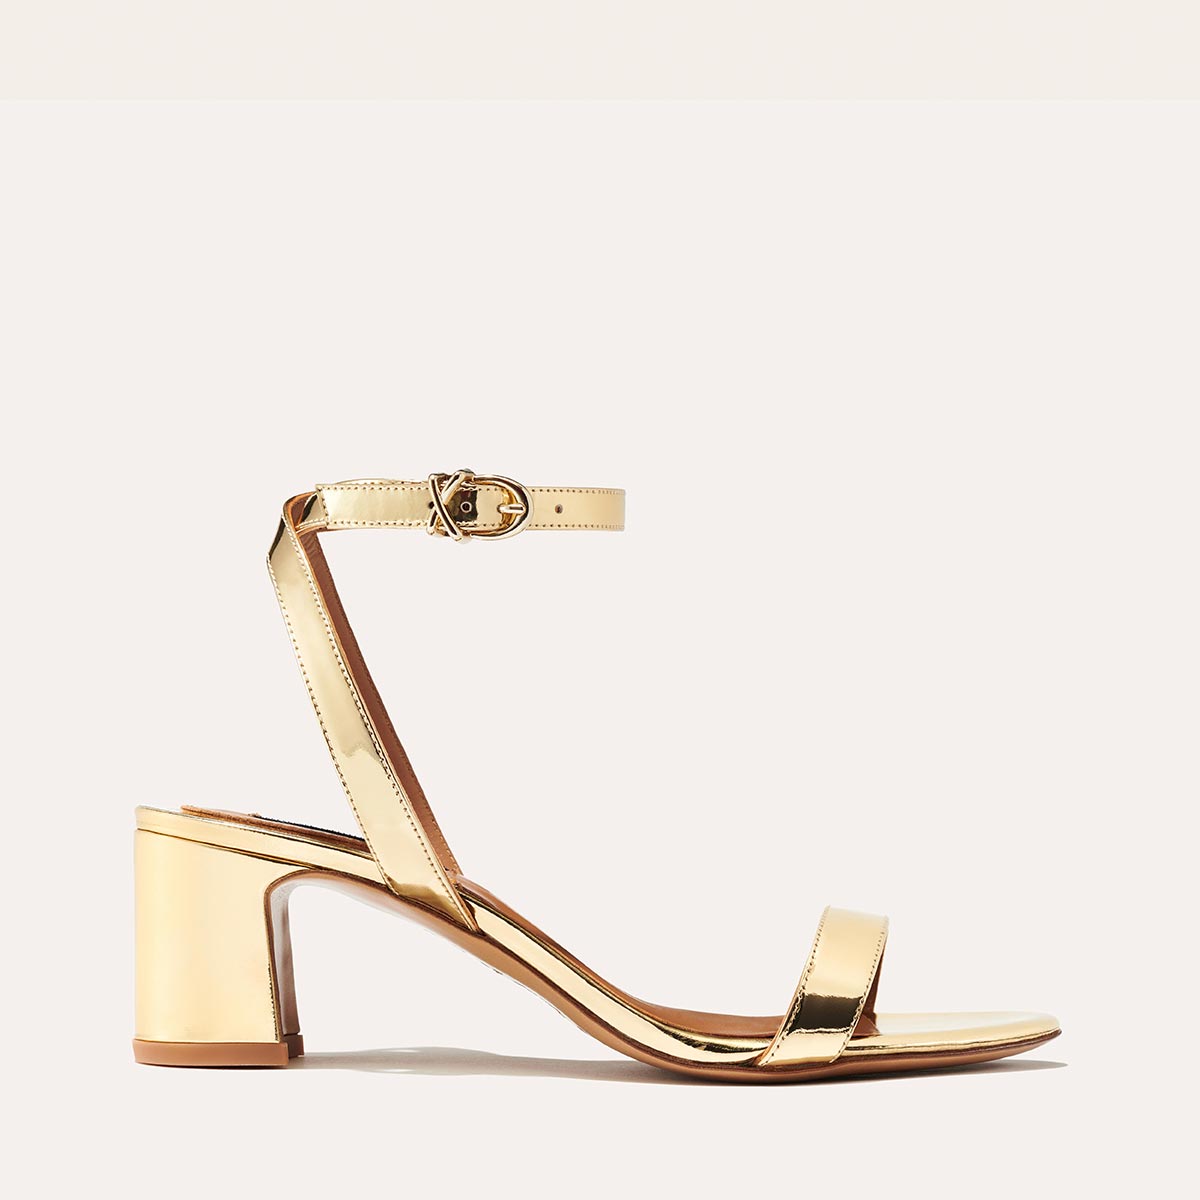 Margaux's classic and comfortable Stella Sandal in metallic gold patent leather with a perfectly placed strap and a walkable block heel